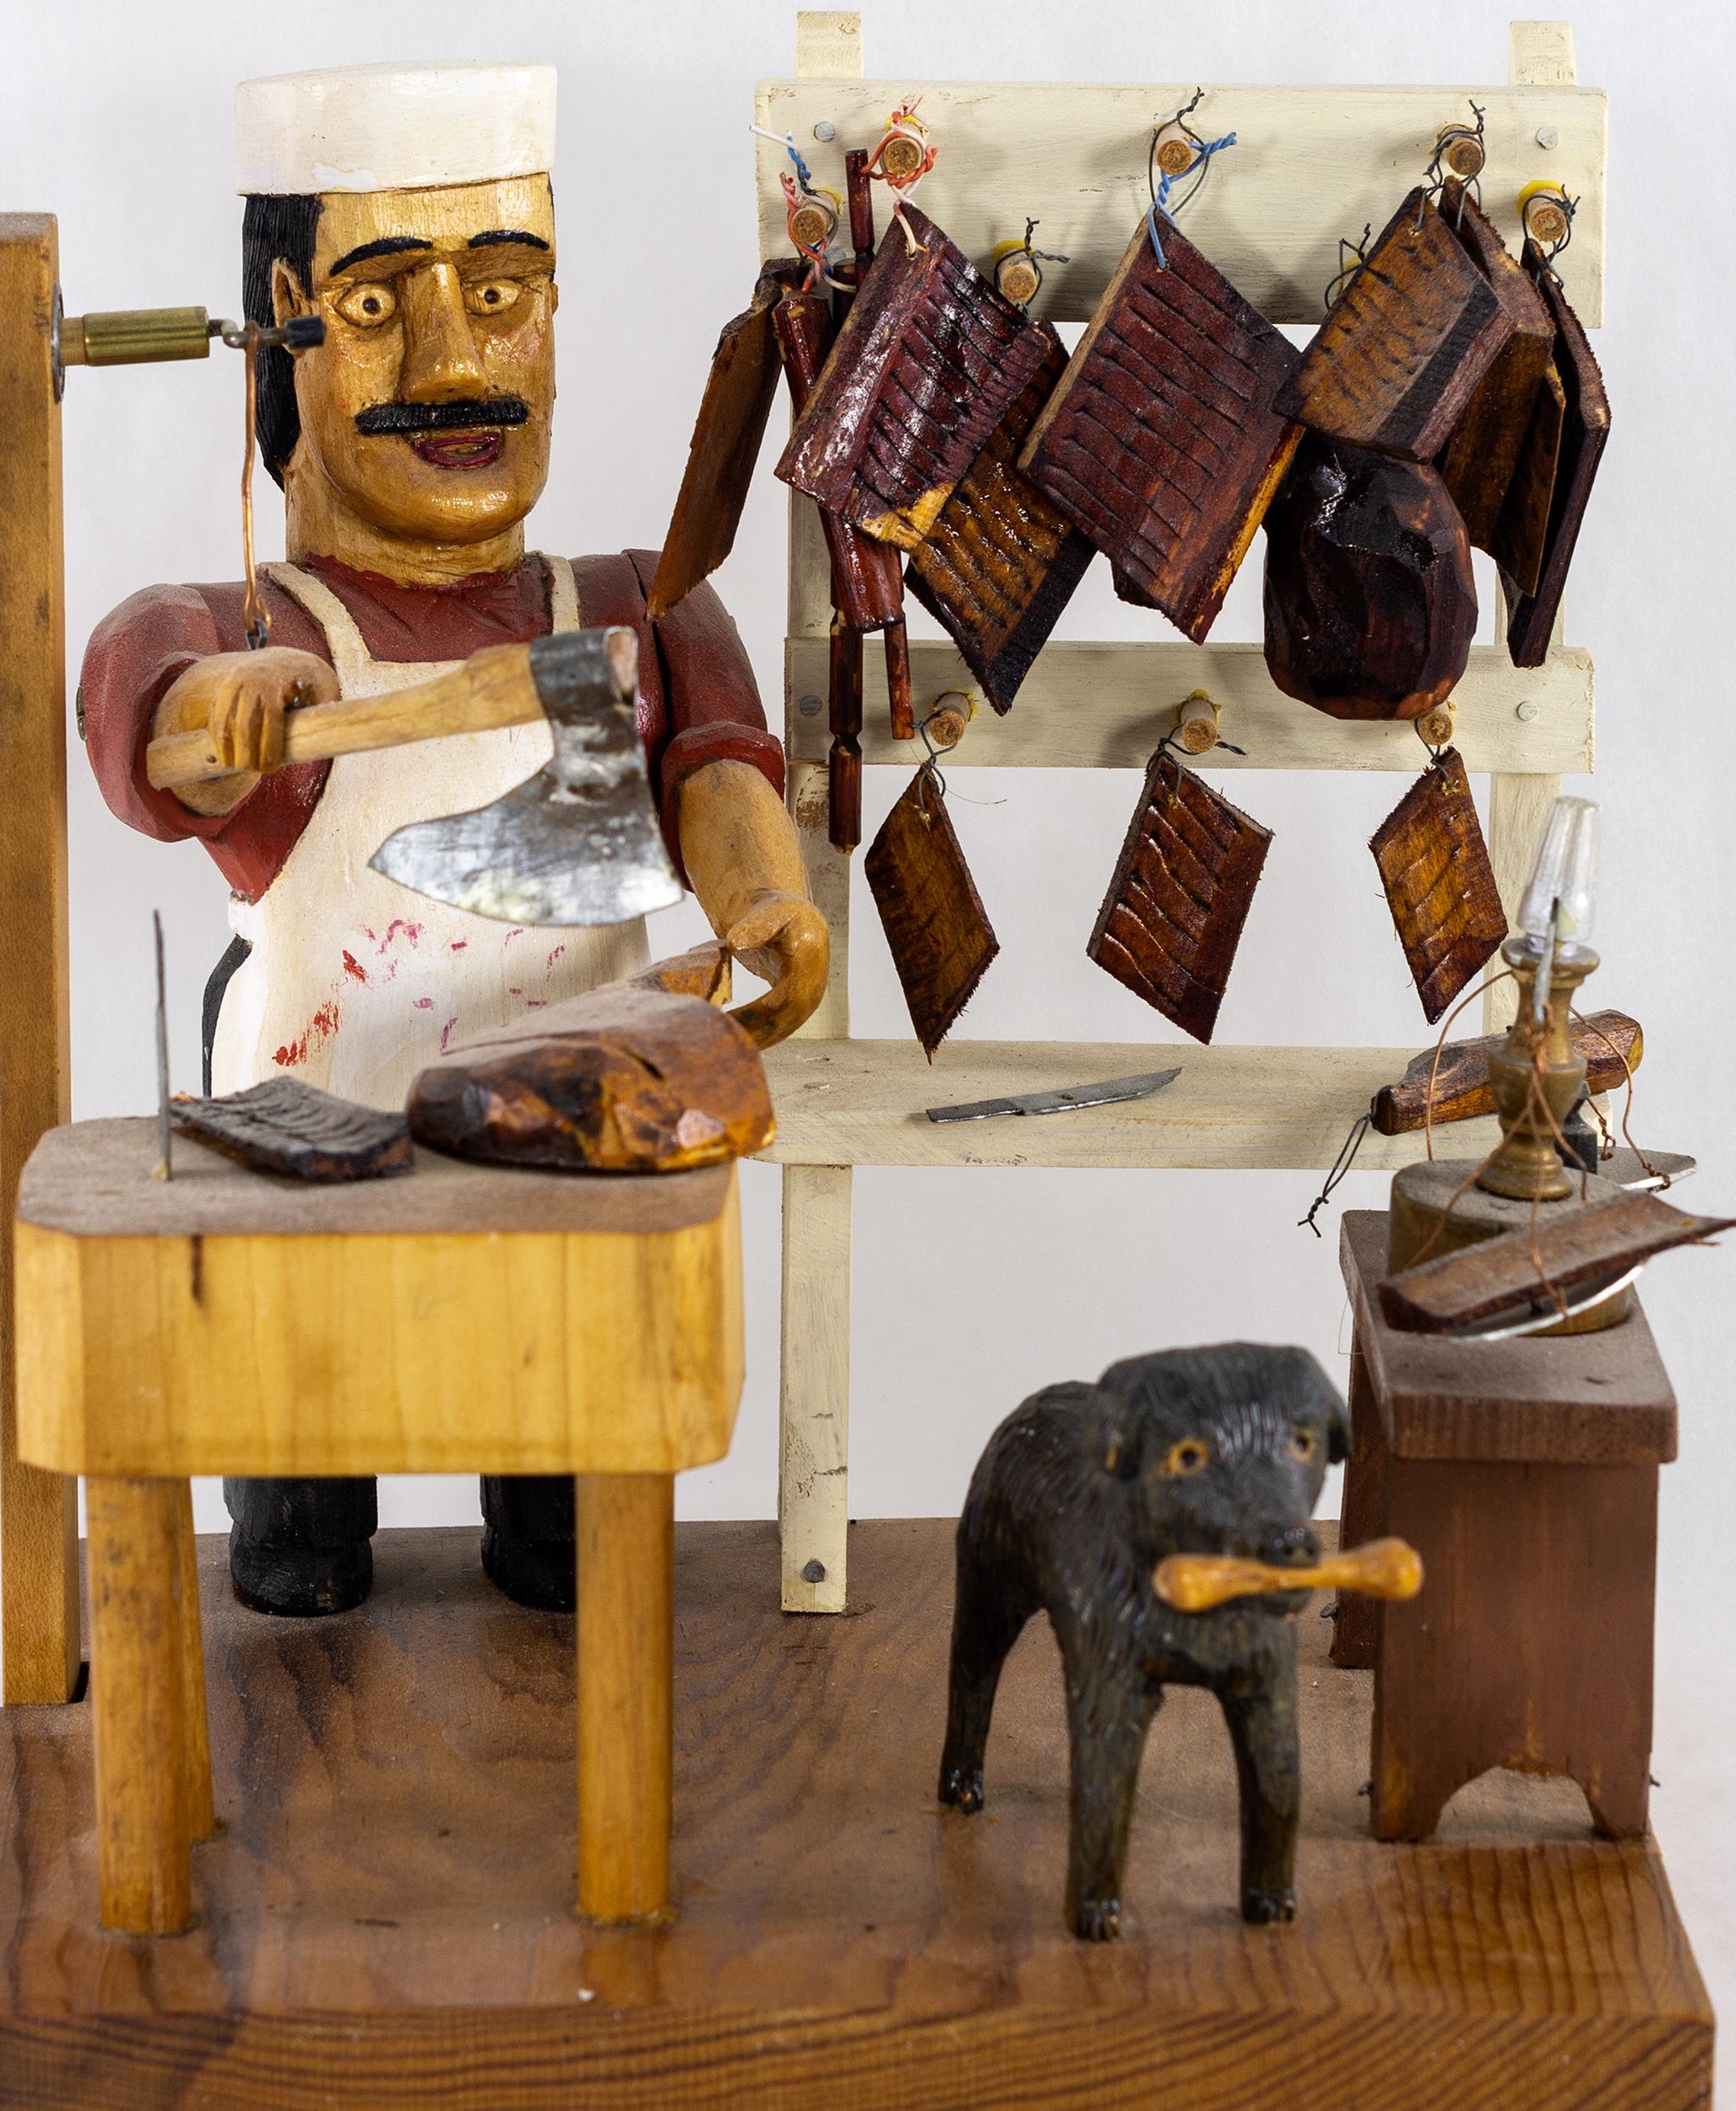 Carved and painted by John (Ivan) Bambic, b. 1922.
This mechanical animated sculpture features a butcher at his block
with meats hanging and a dog at his side.
Signed on the bottom.
 